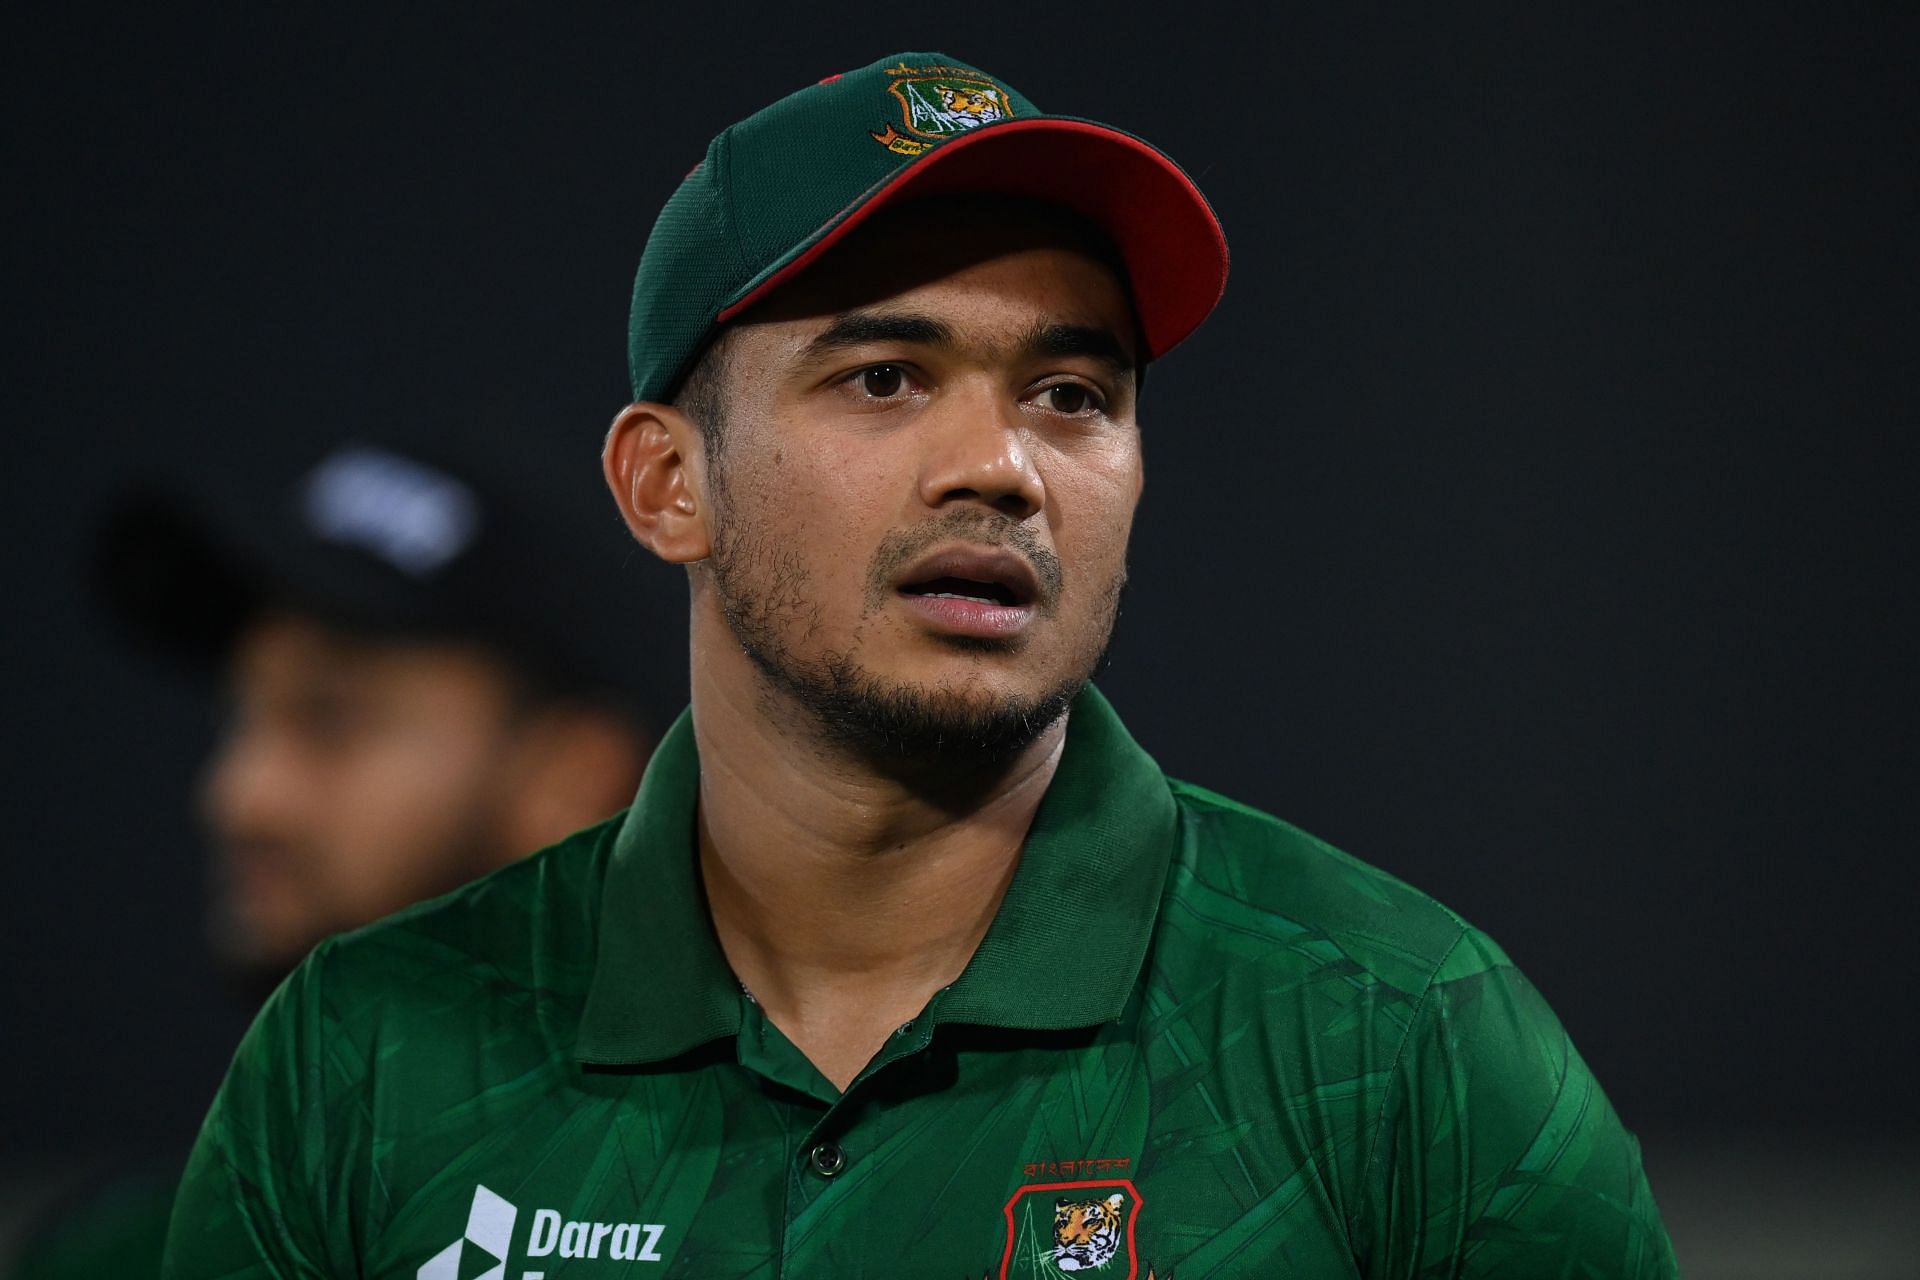 Bangladesh vs Afghanistan, 2nd T20I: Probable XIs, Match Prediction, Pitch Report, Weather Forecast and Live Streaming Details